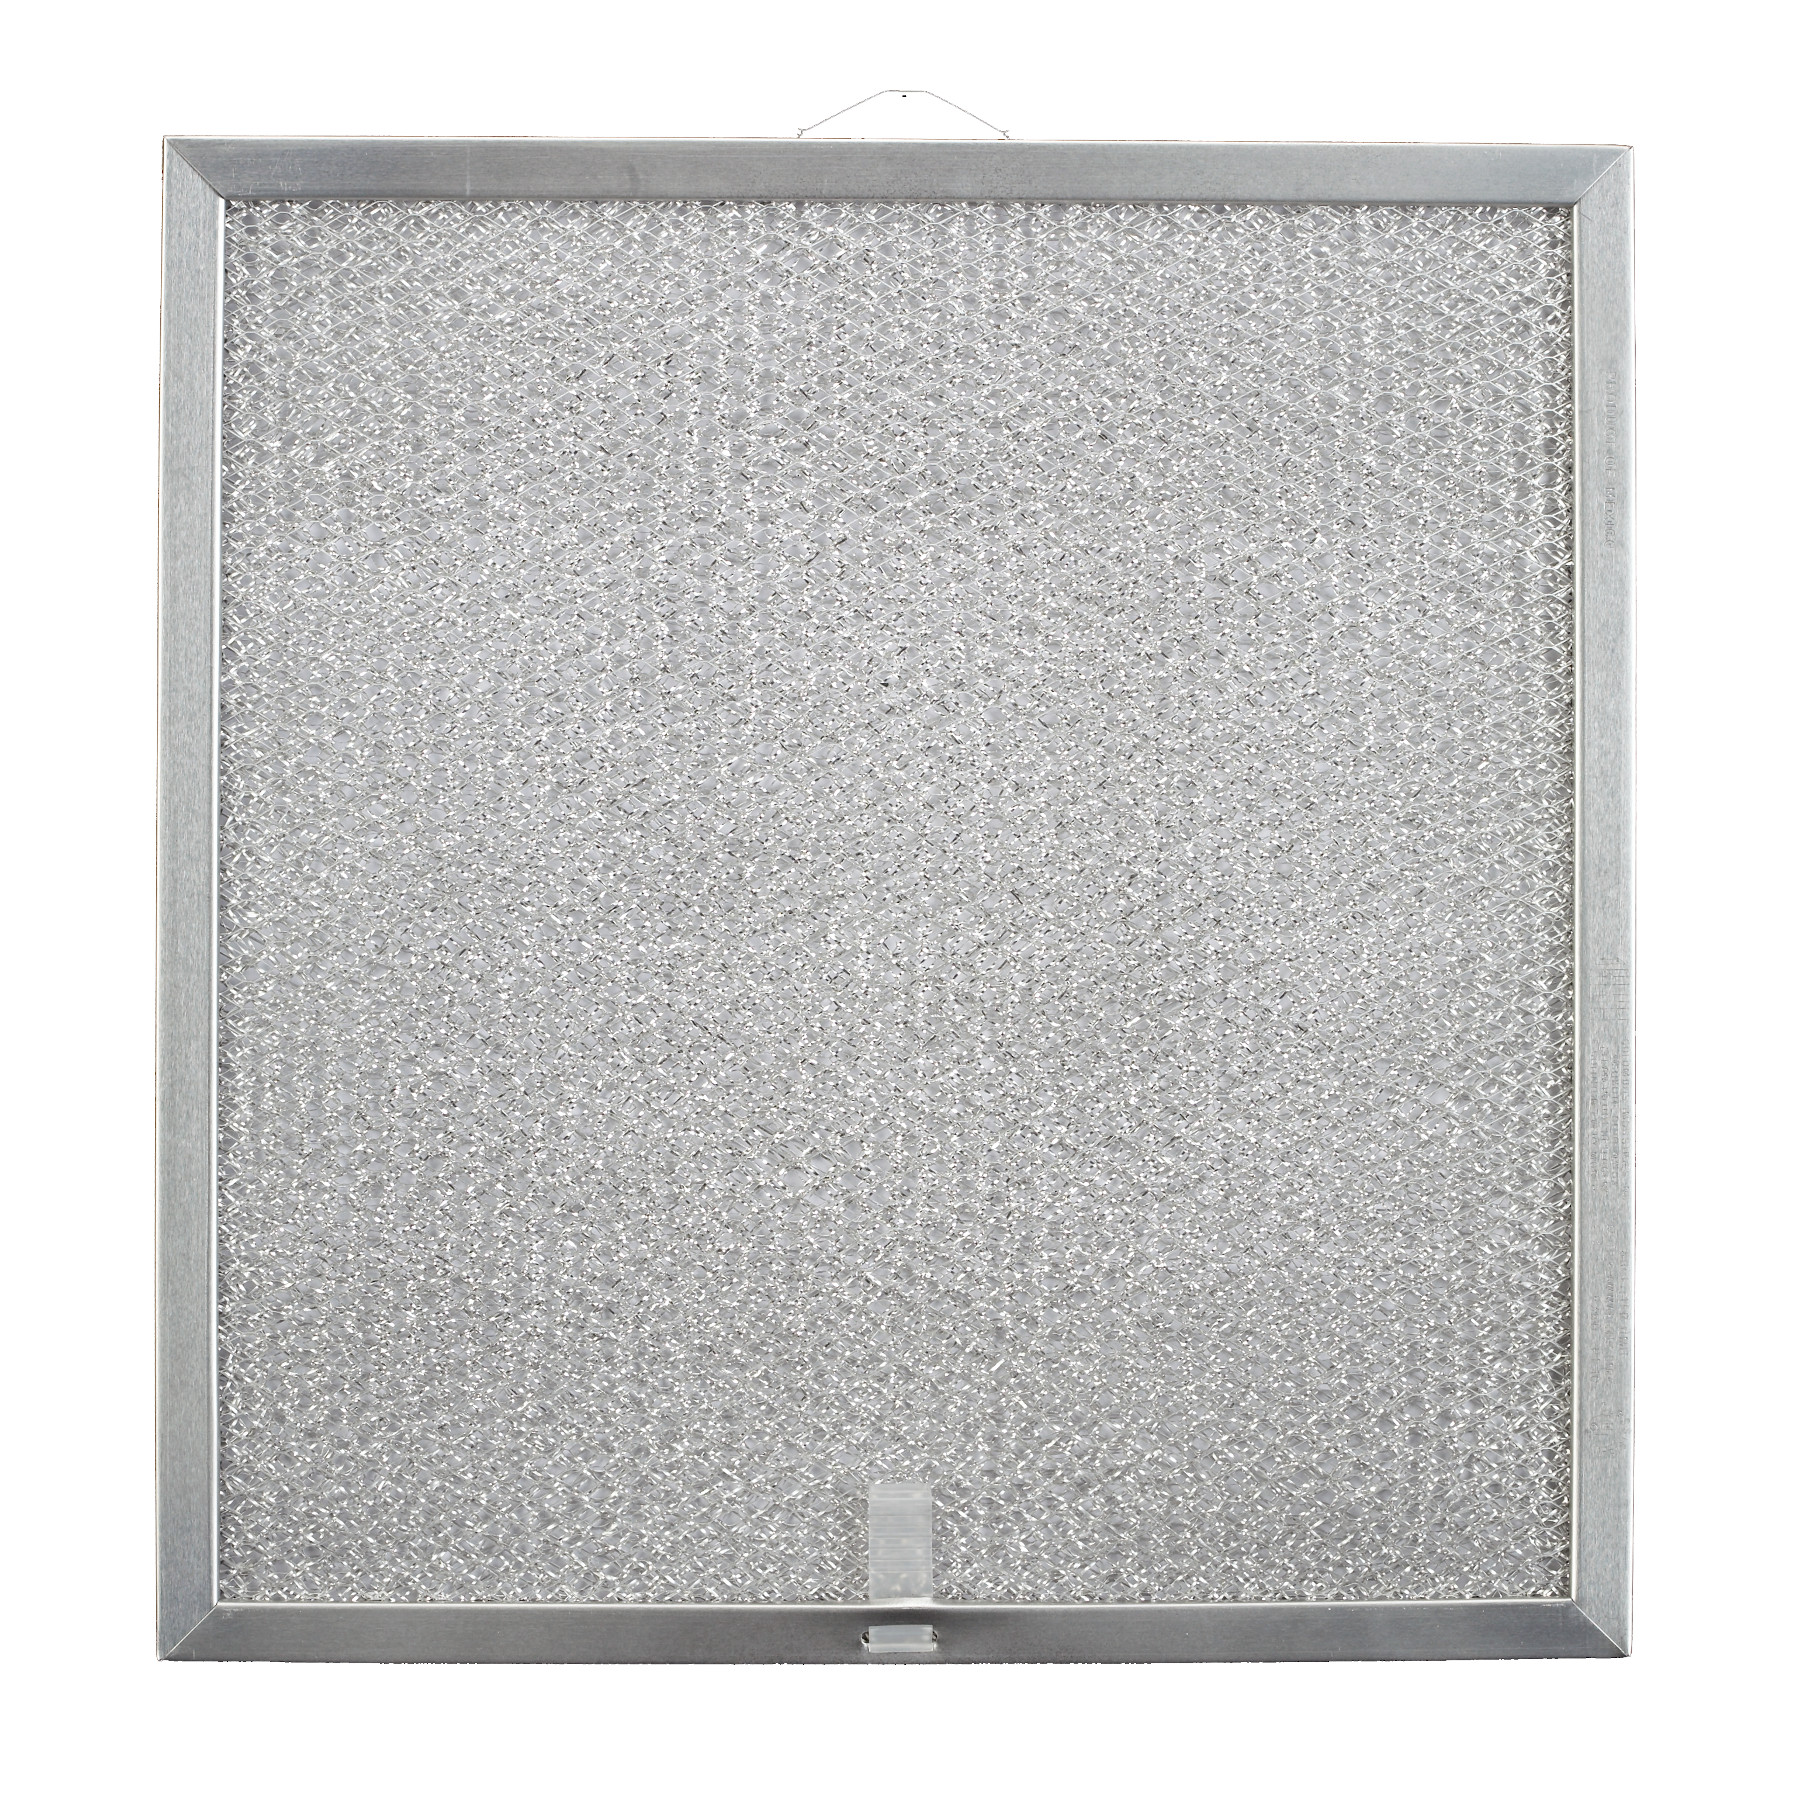 Broan-NuTone® Genuine Replacement Aluminum Filter for Range Hoods, 11-5/8" X 11-1/4", Fits Select Models